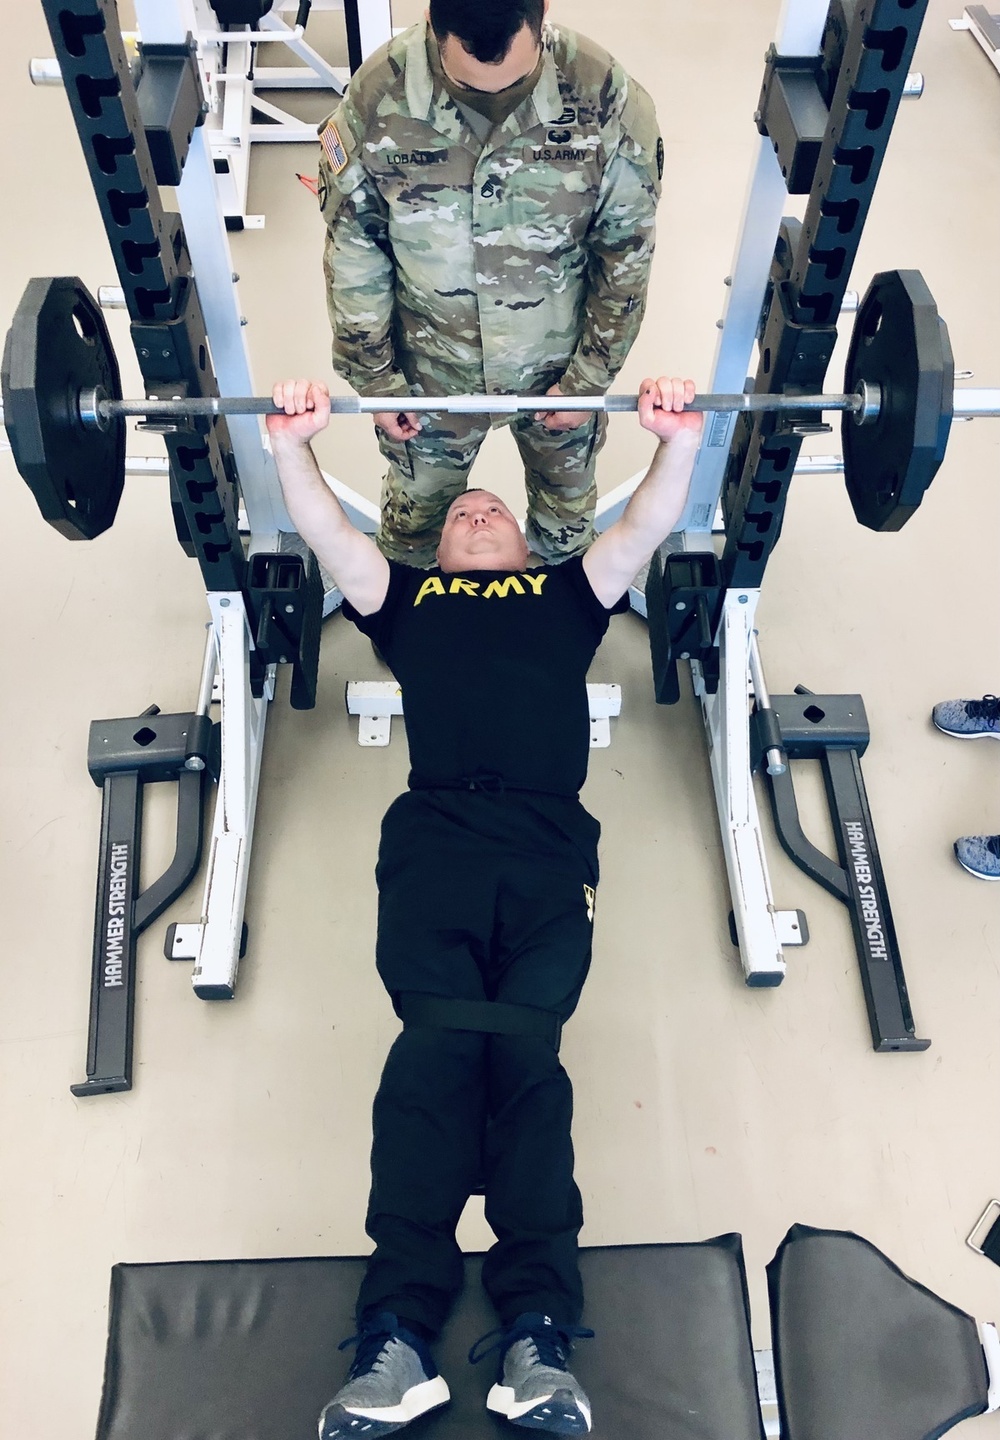 Months of preparation go into Fort Campbell SRU Soldiers’ 2021 Army Trials